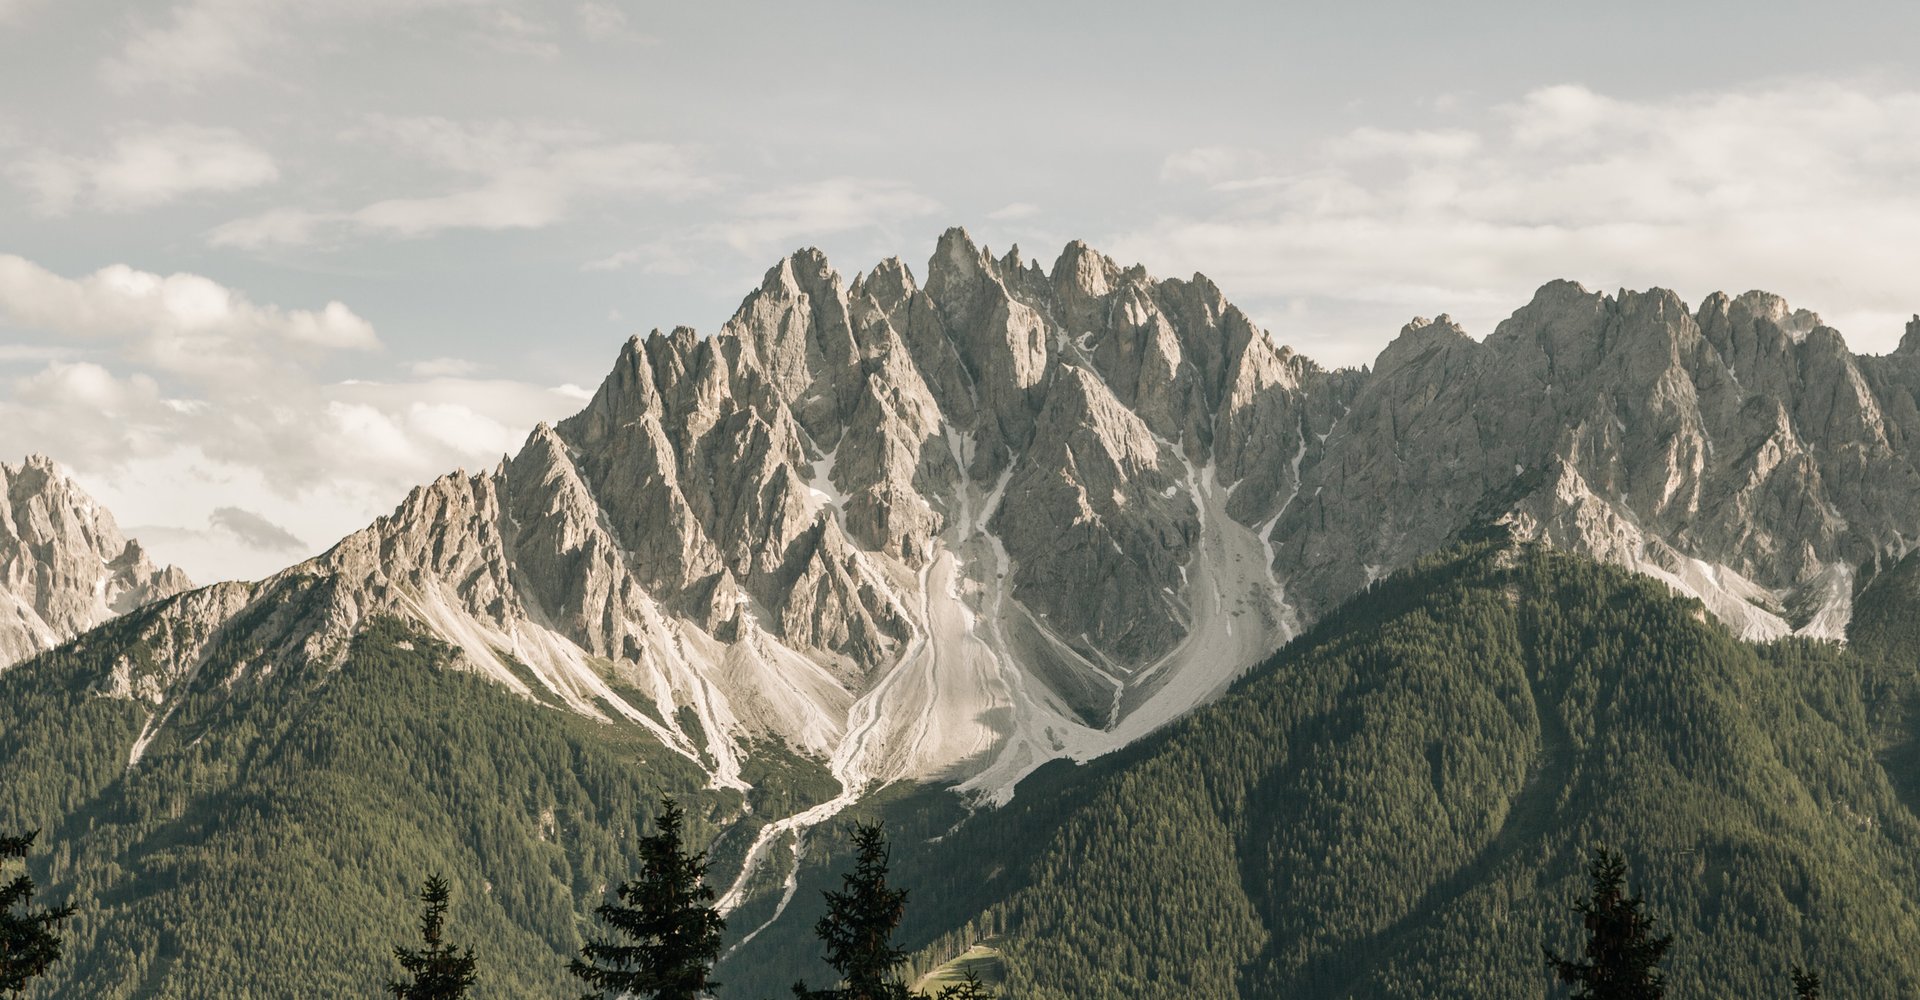 The Nature of Dolomites